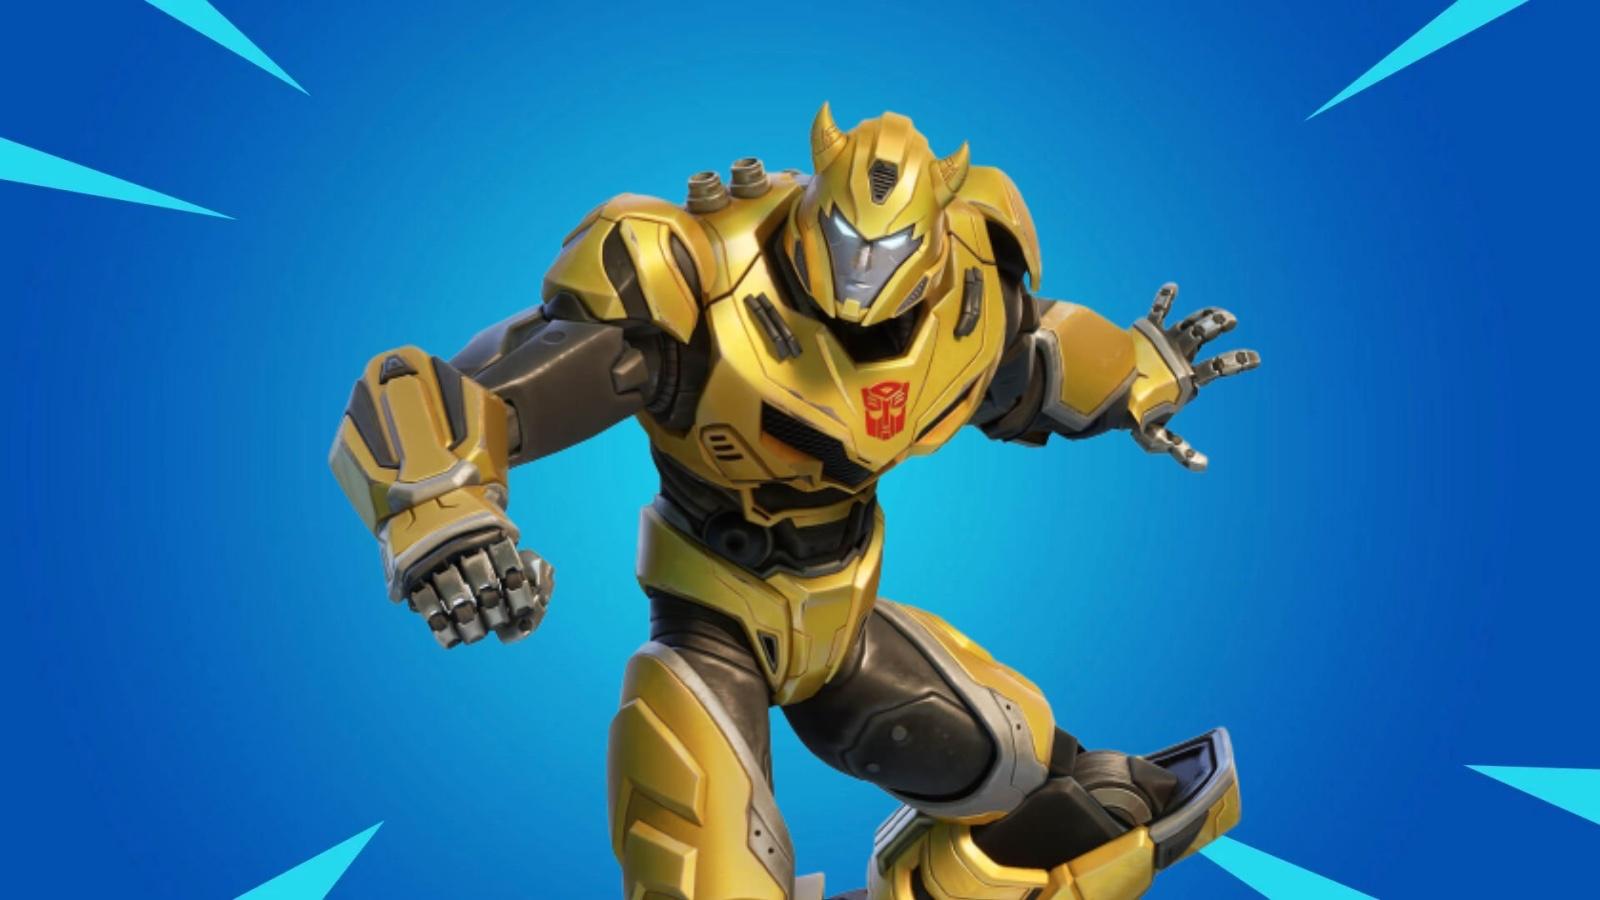 Fortnite’s Transformers Pack invites players to roll out with new items